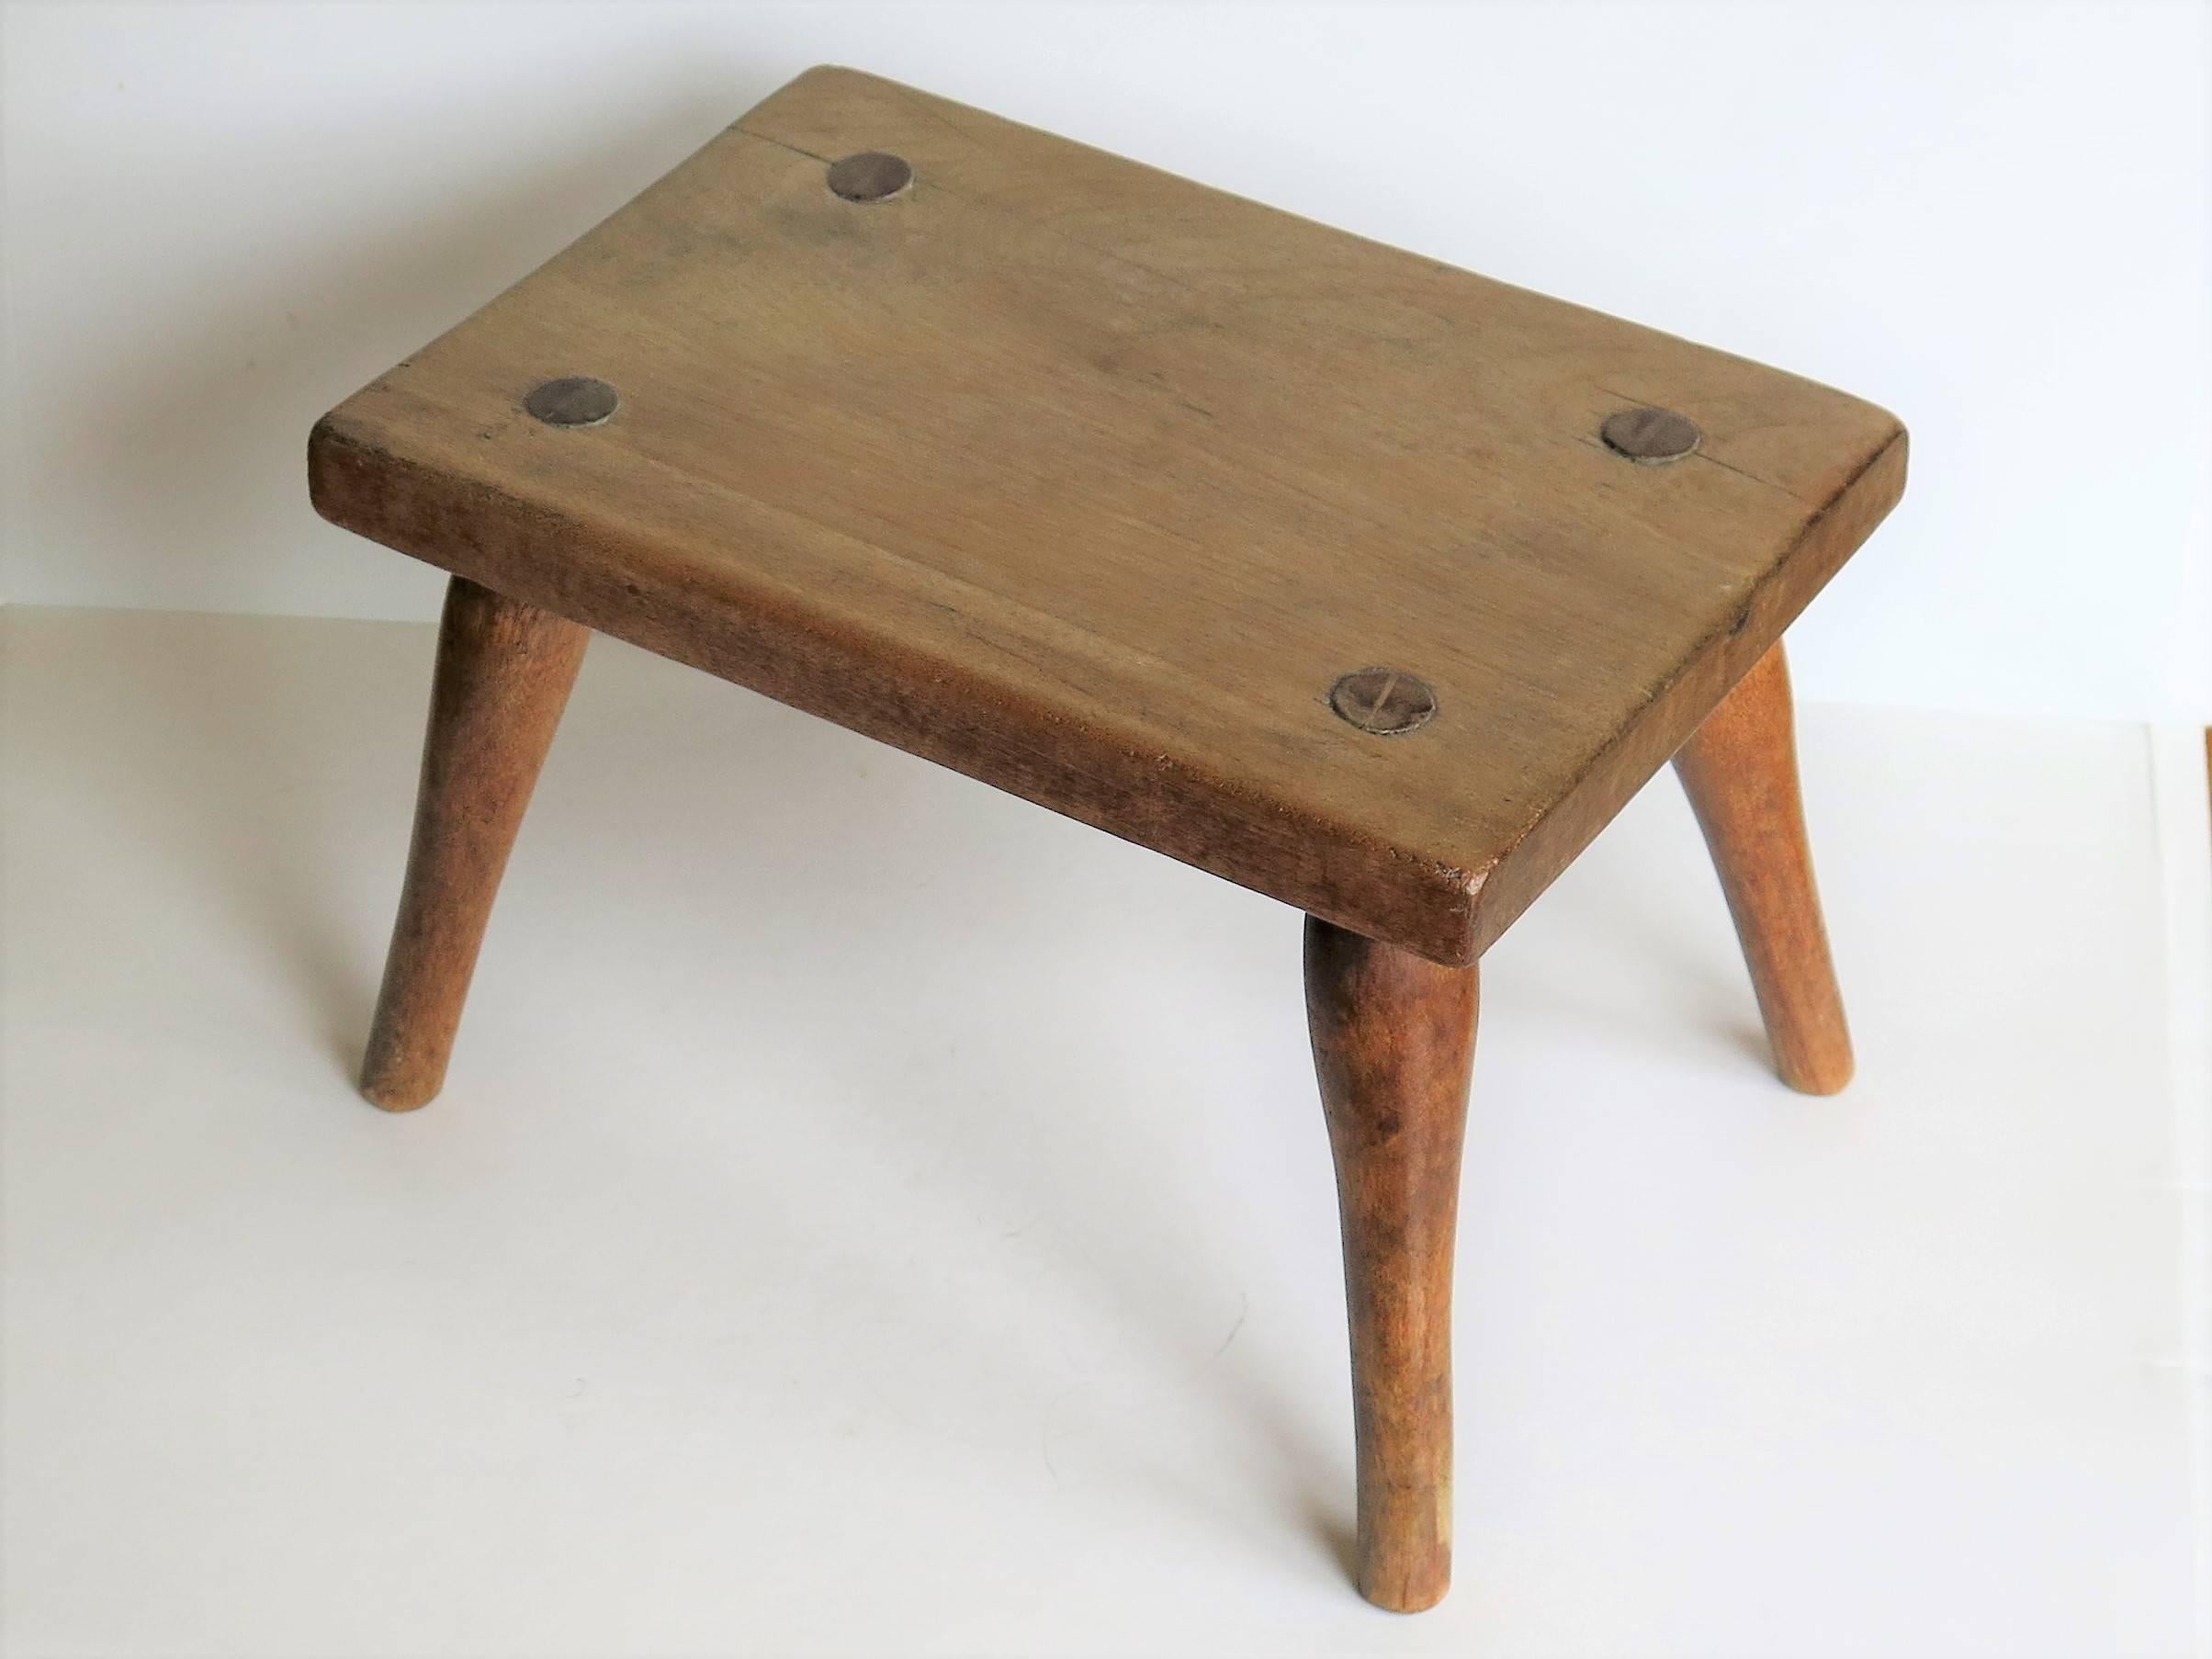 This is an English country foot stool or candle stand from the early 19th century.

The top is made from a single piece of ash and the four splayed turned legs are made of beech. Each leg is tapered forming a tenon, which is morticed through the top